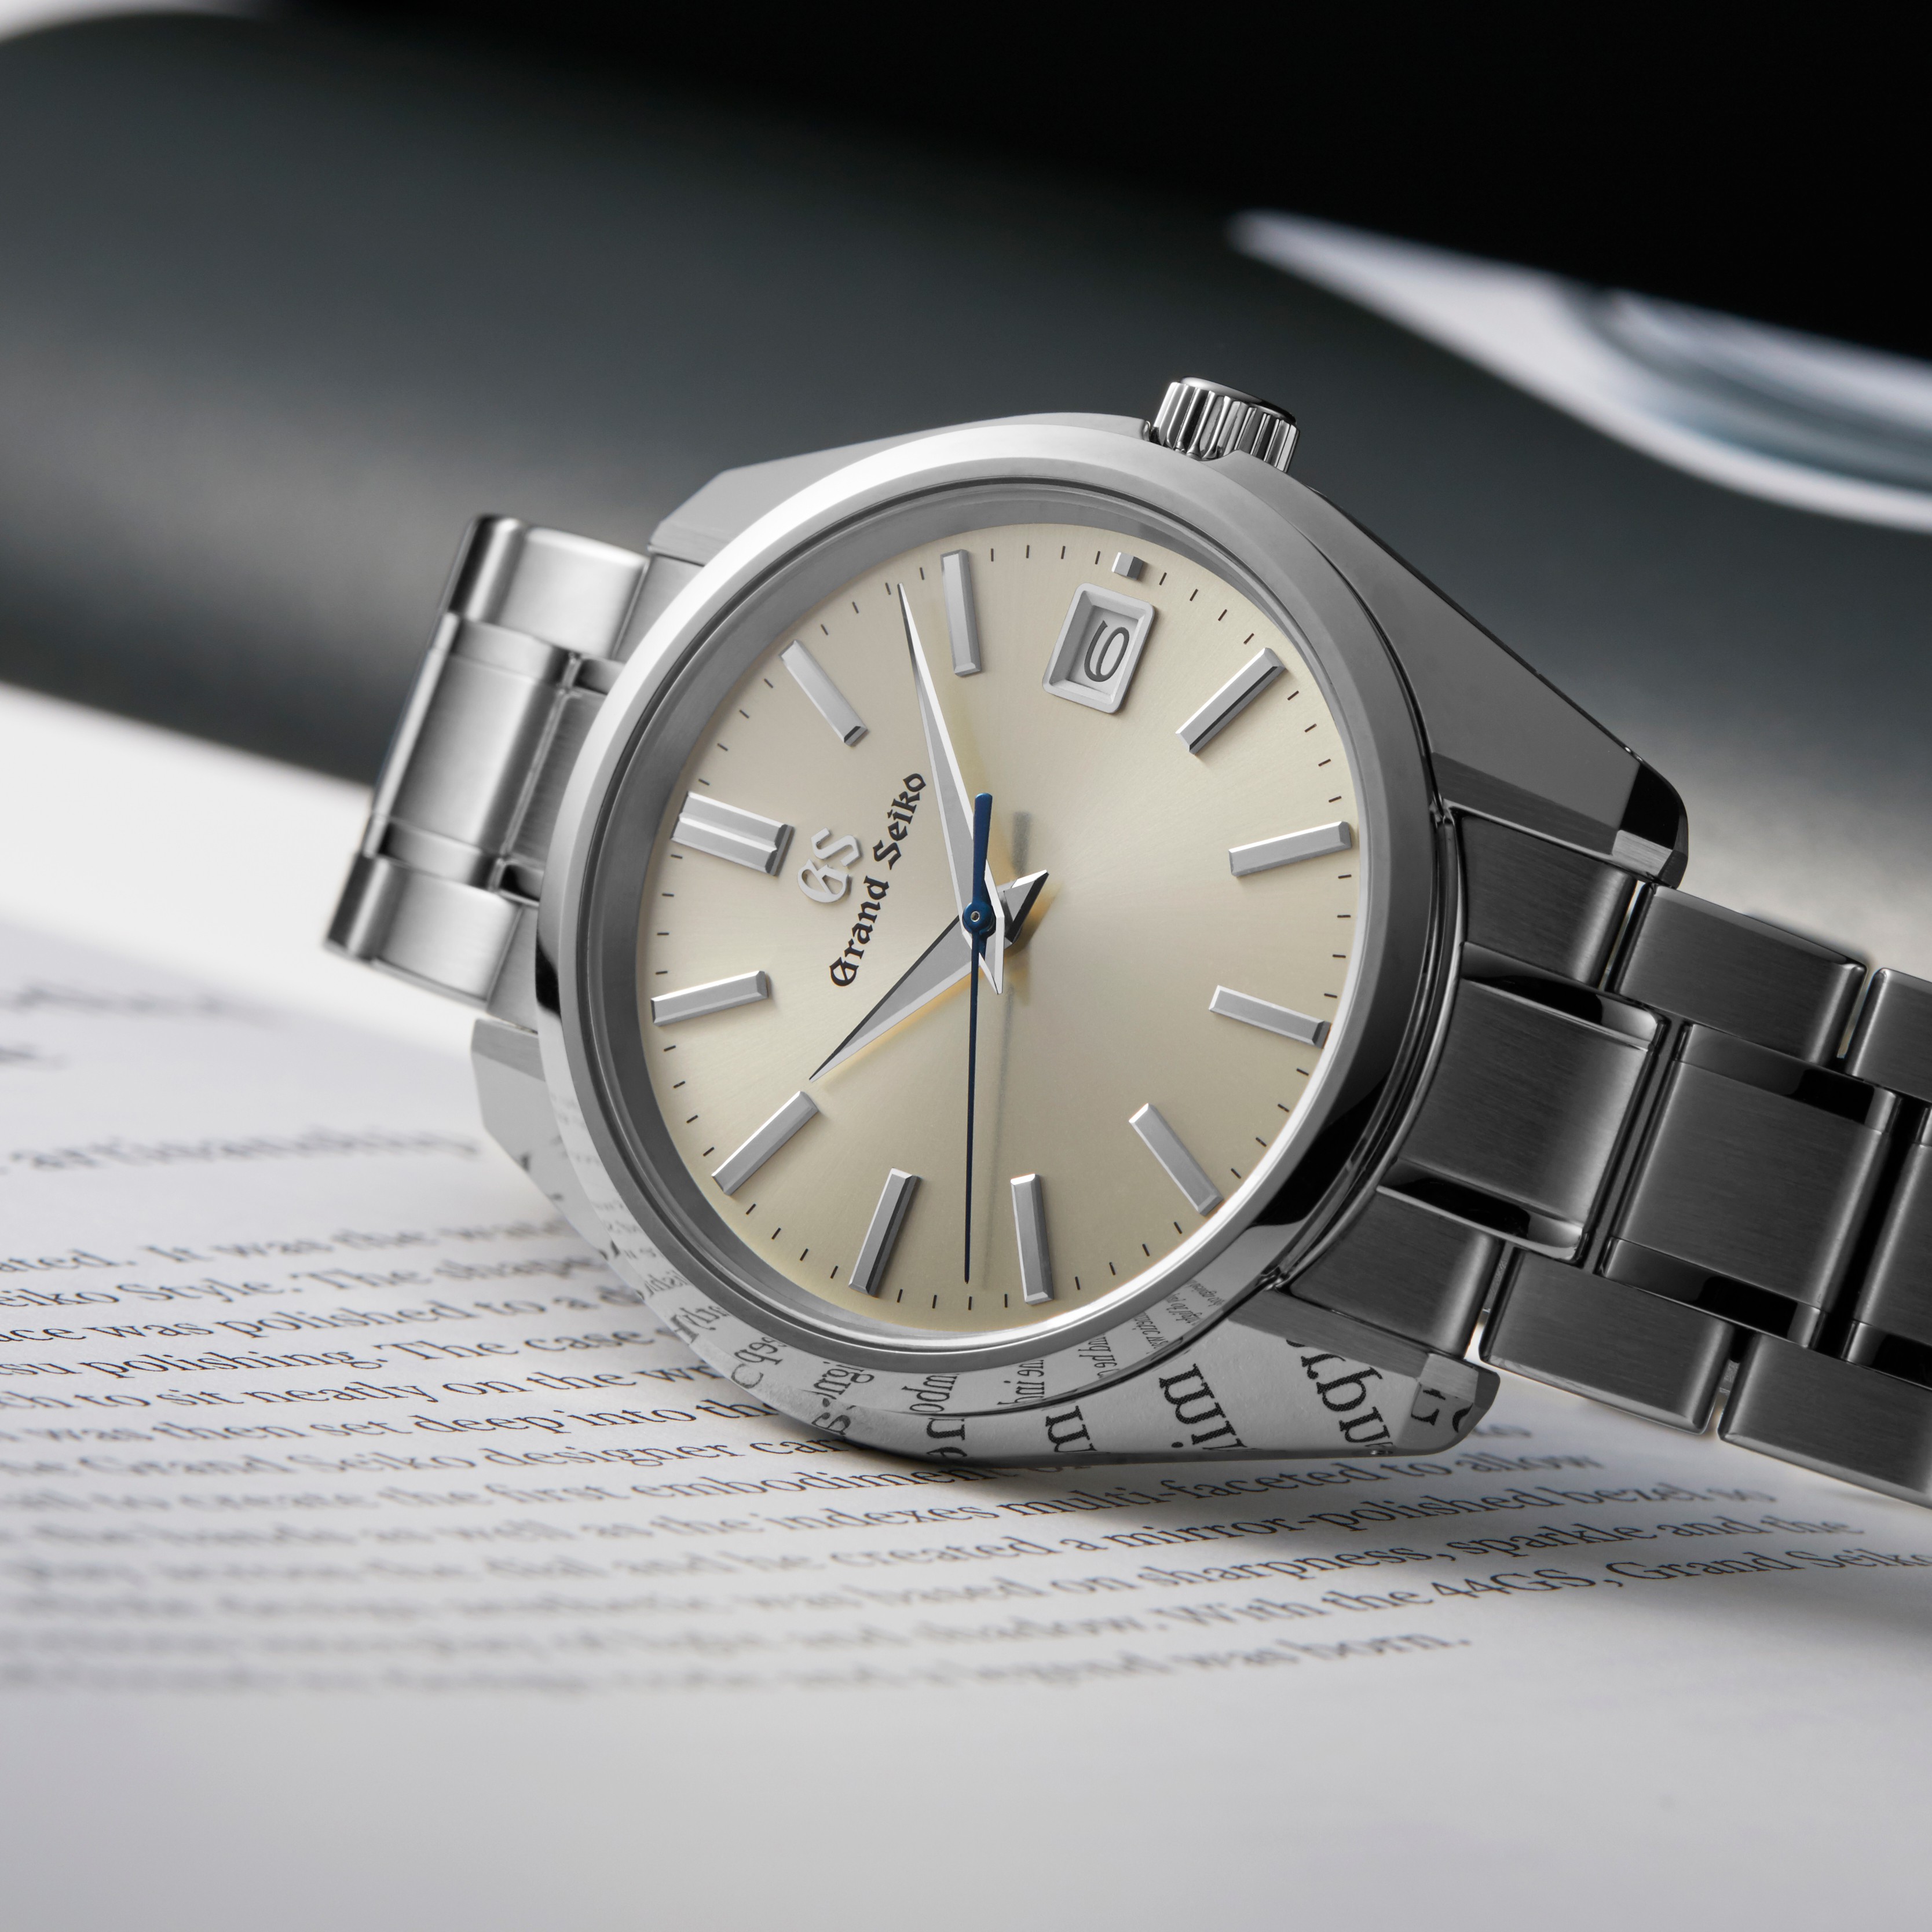 SBGP001 - Analogue - 3 Hands - Buy Online Grand Seiko Boutique